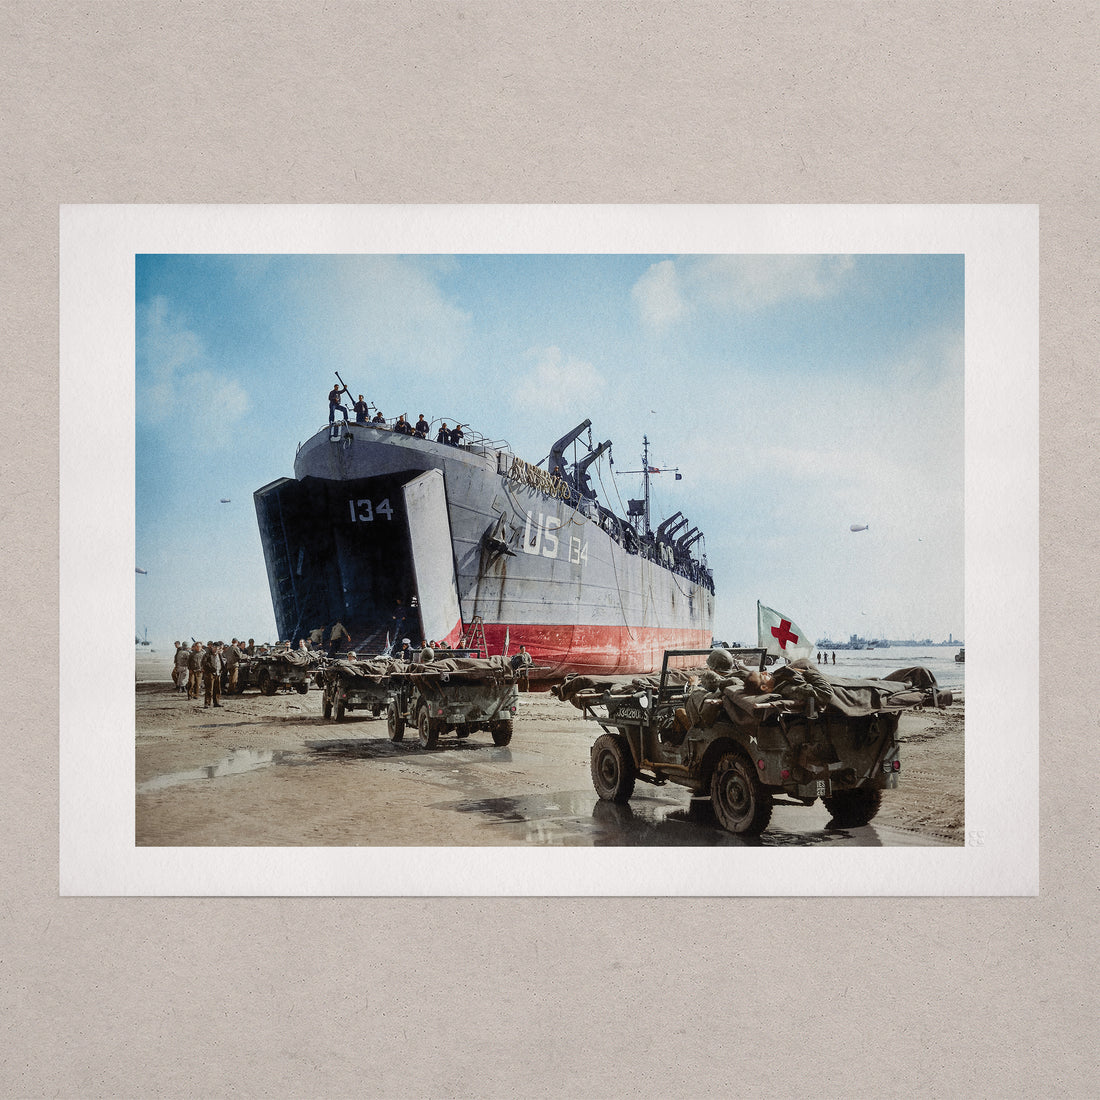 LST-134, 1944, Colorized